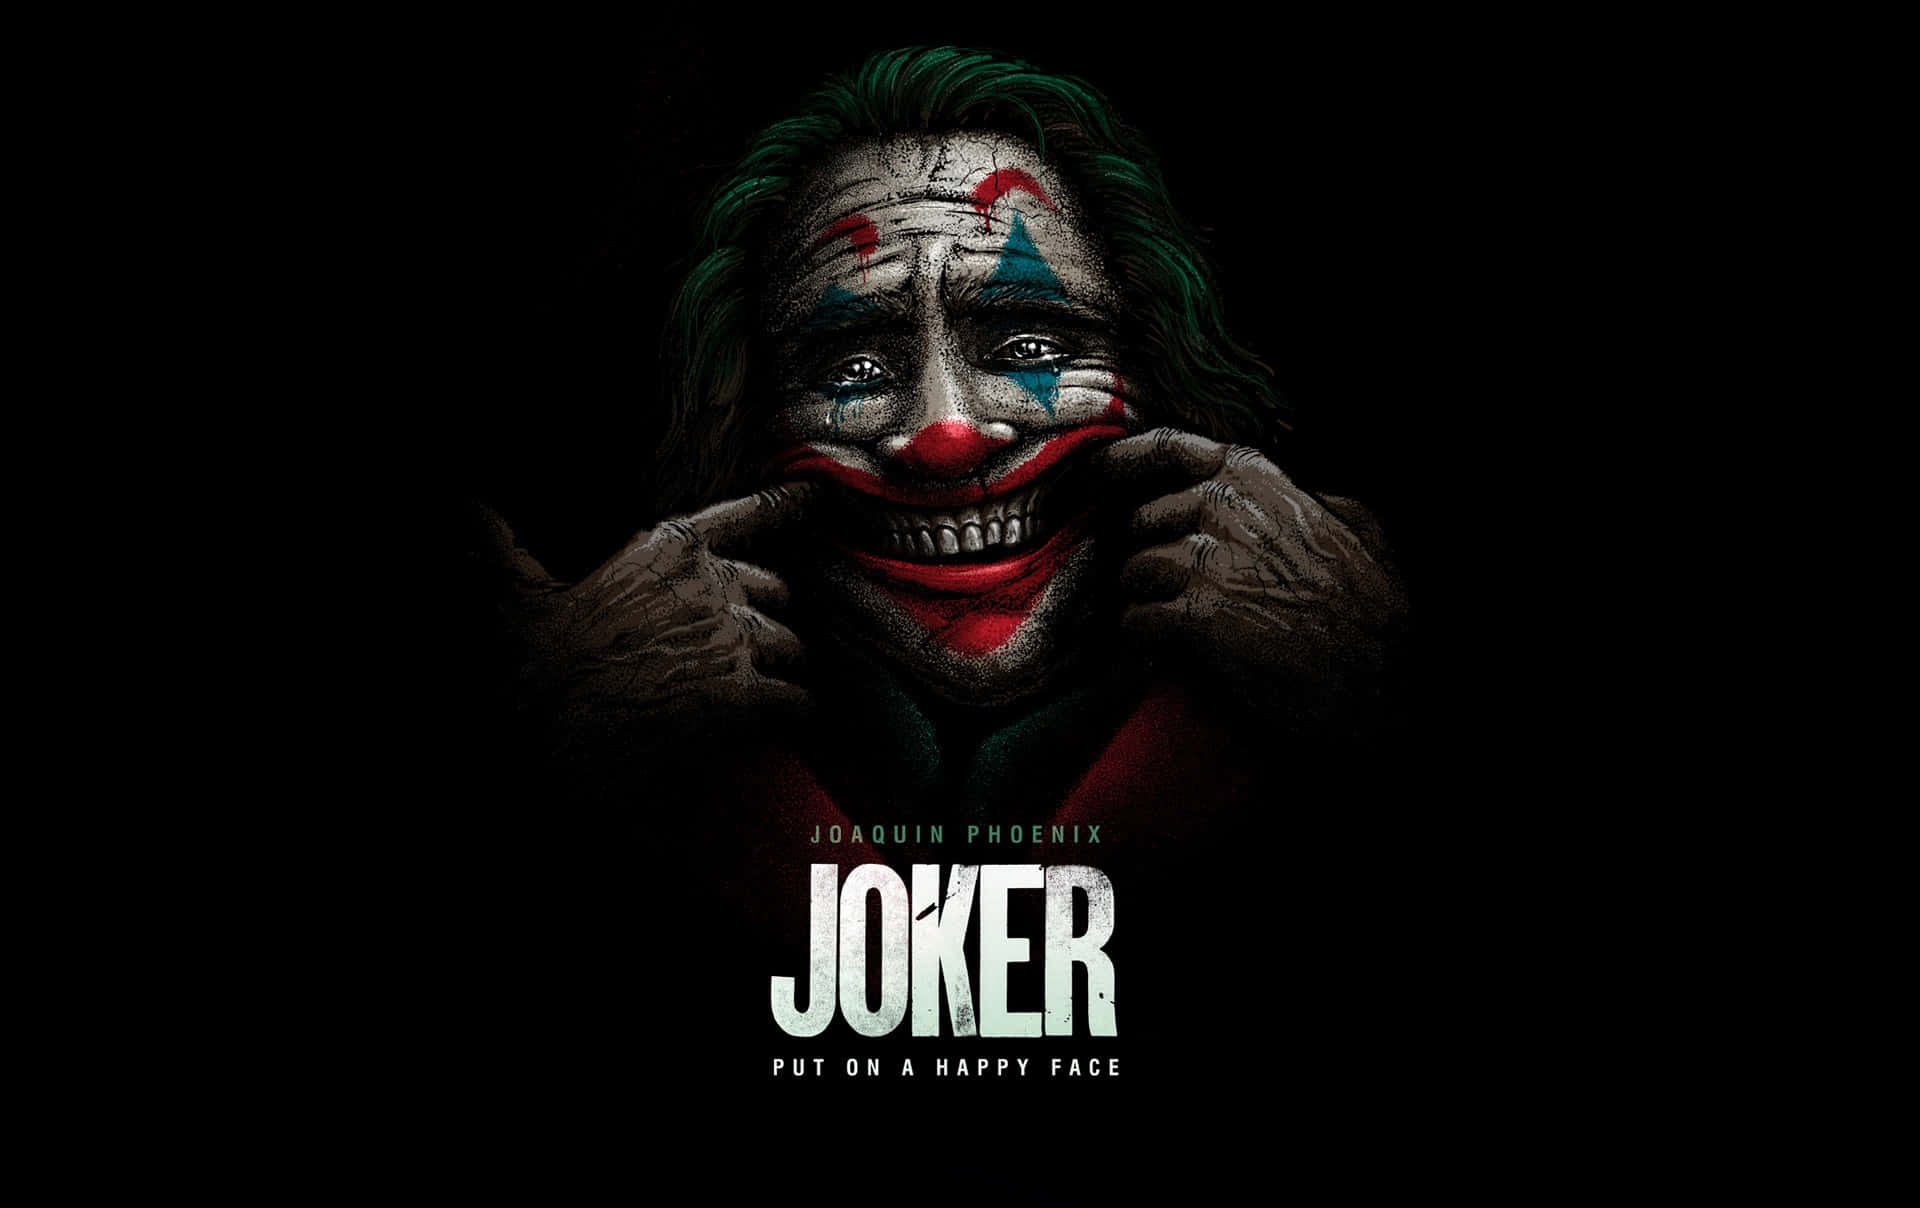 Get ready to cause havoc with your own Joker Mask!